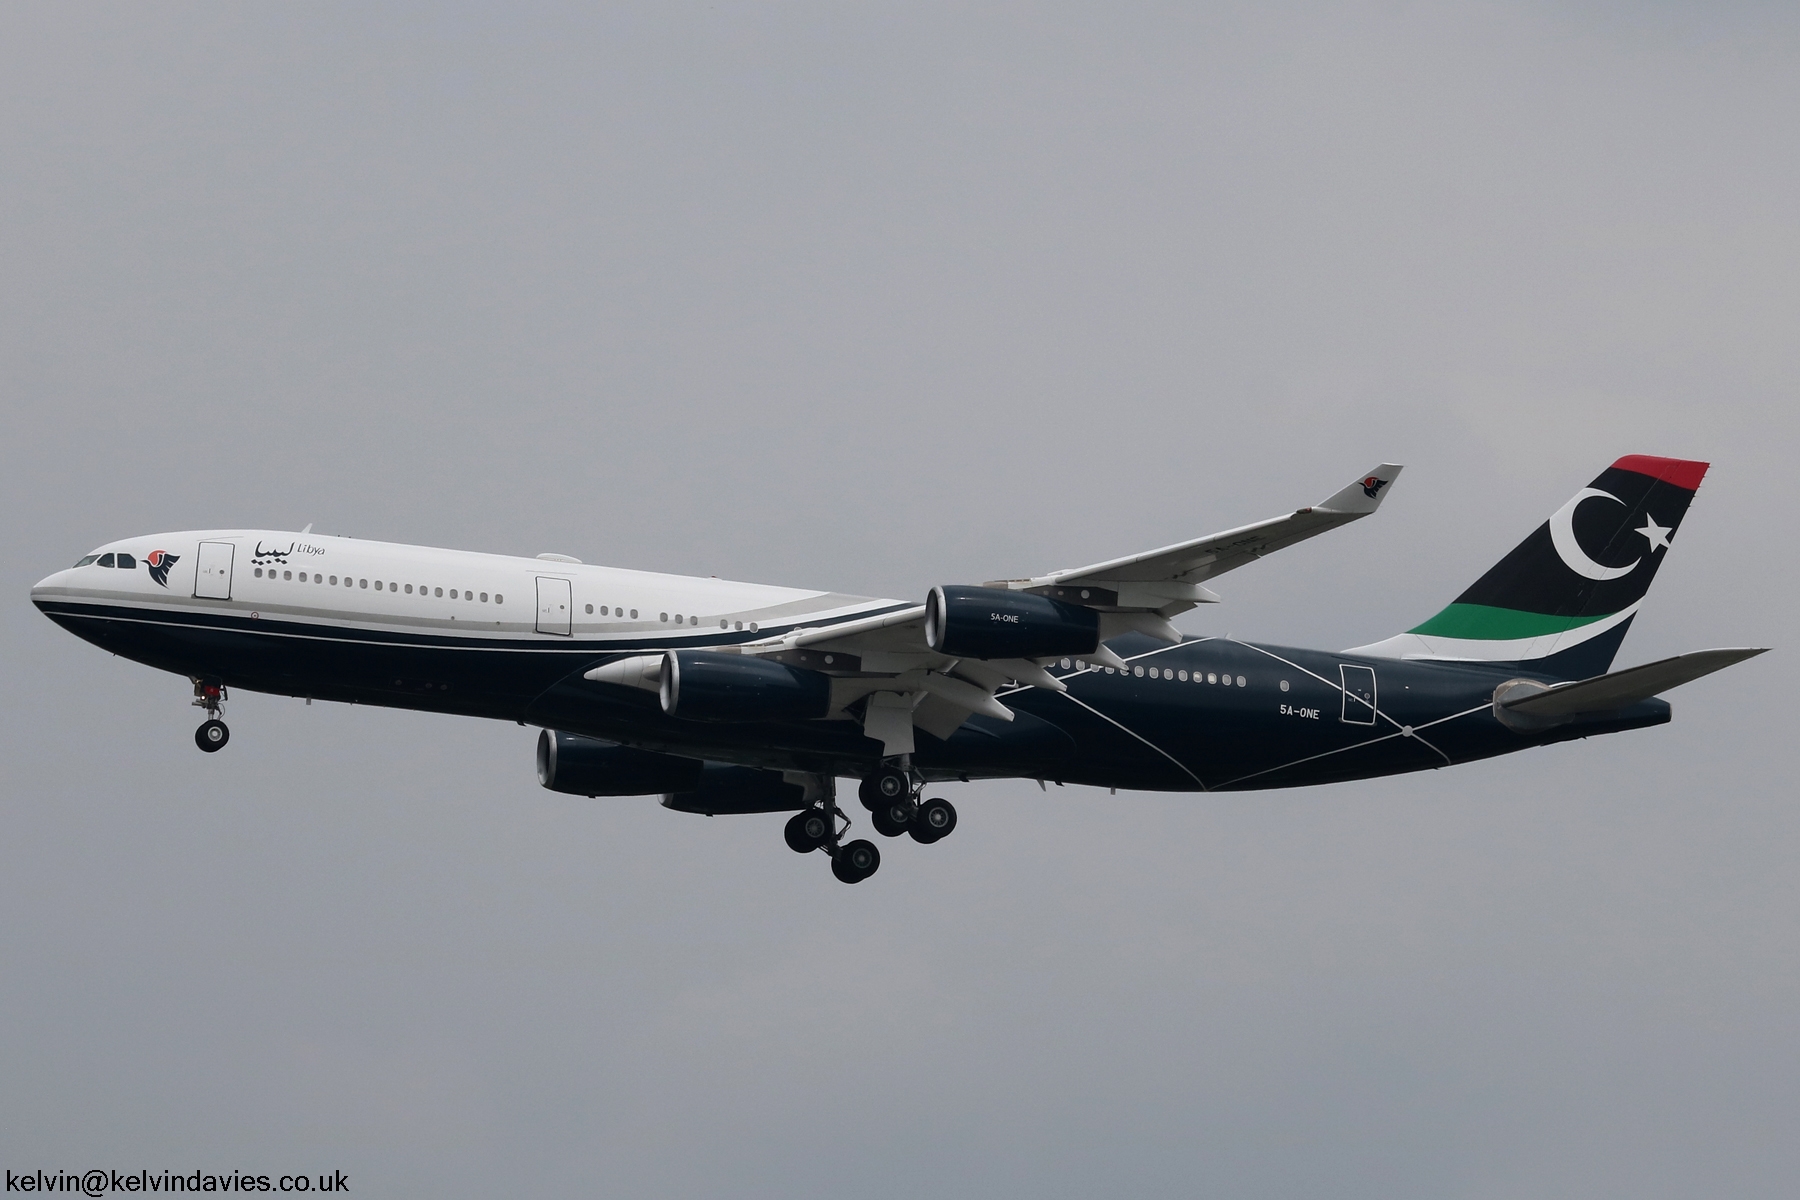 Government of Libya A340 5A-ONE